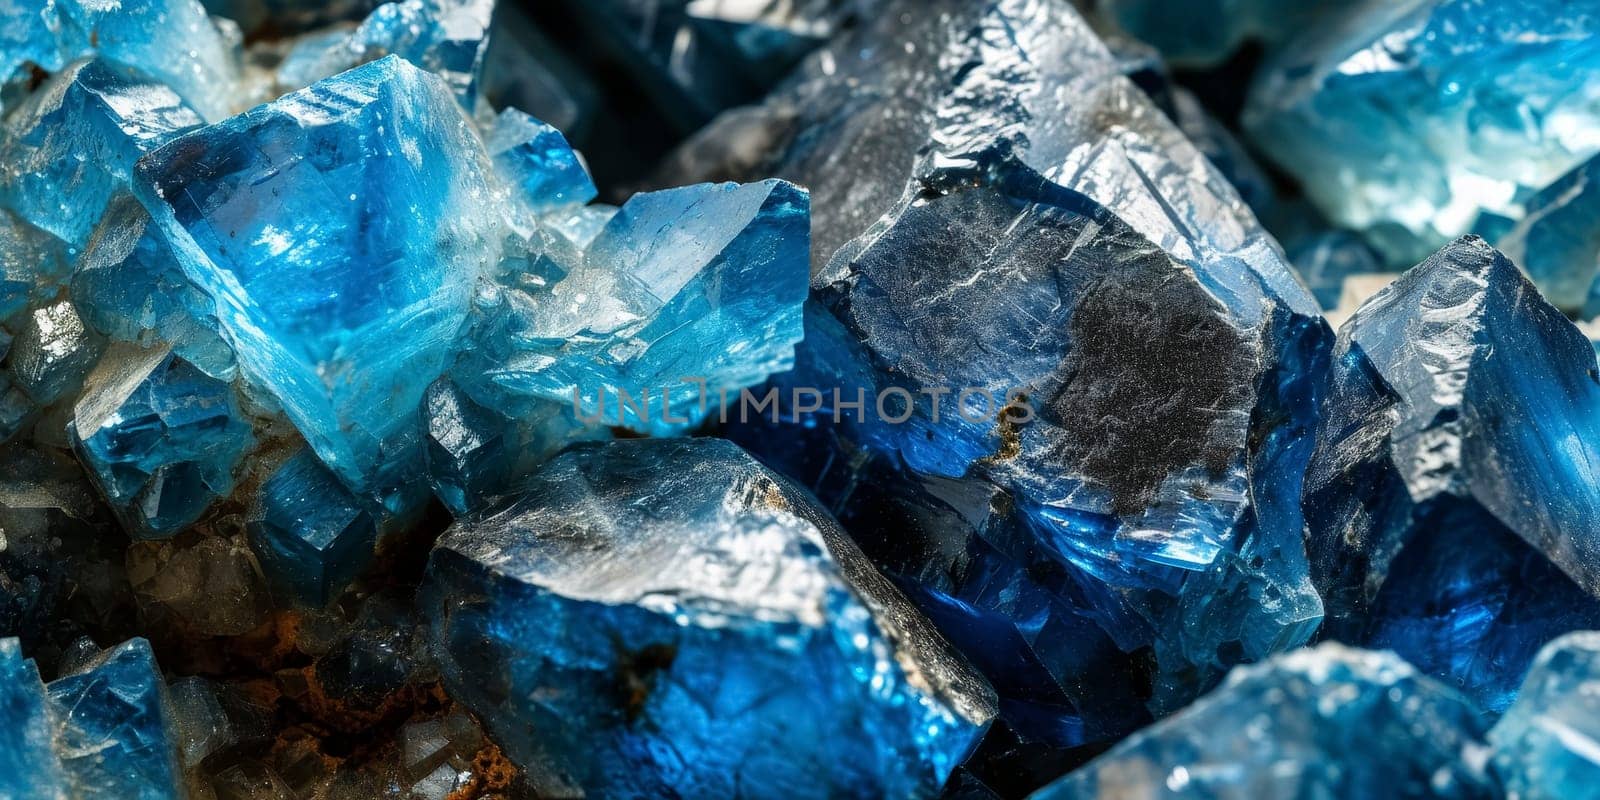 Close-up of radiant blue mineral crystals with sharp edges and a deep blue color.